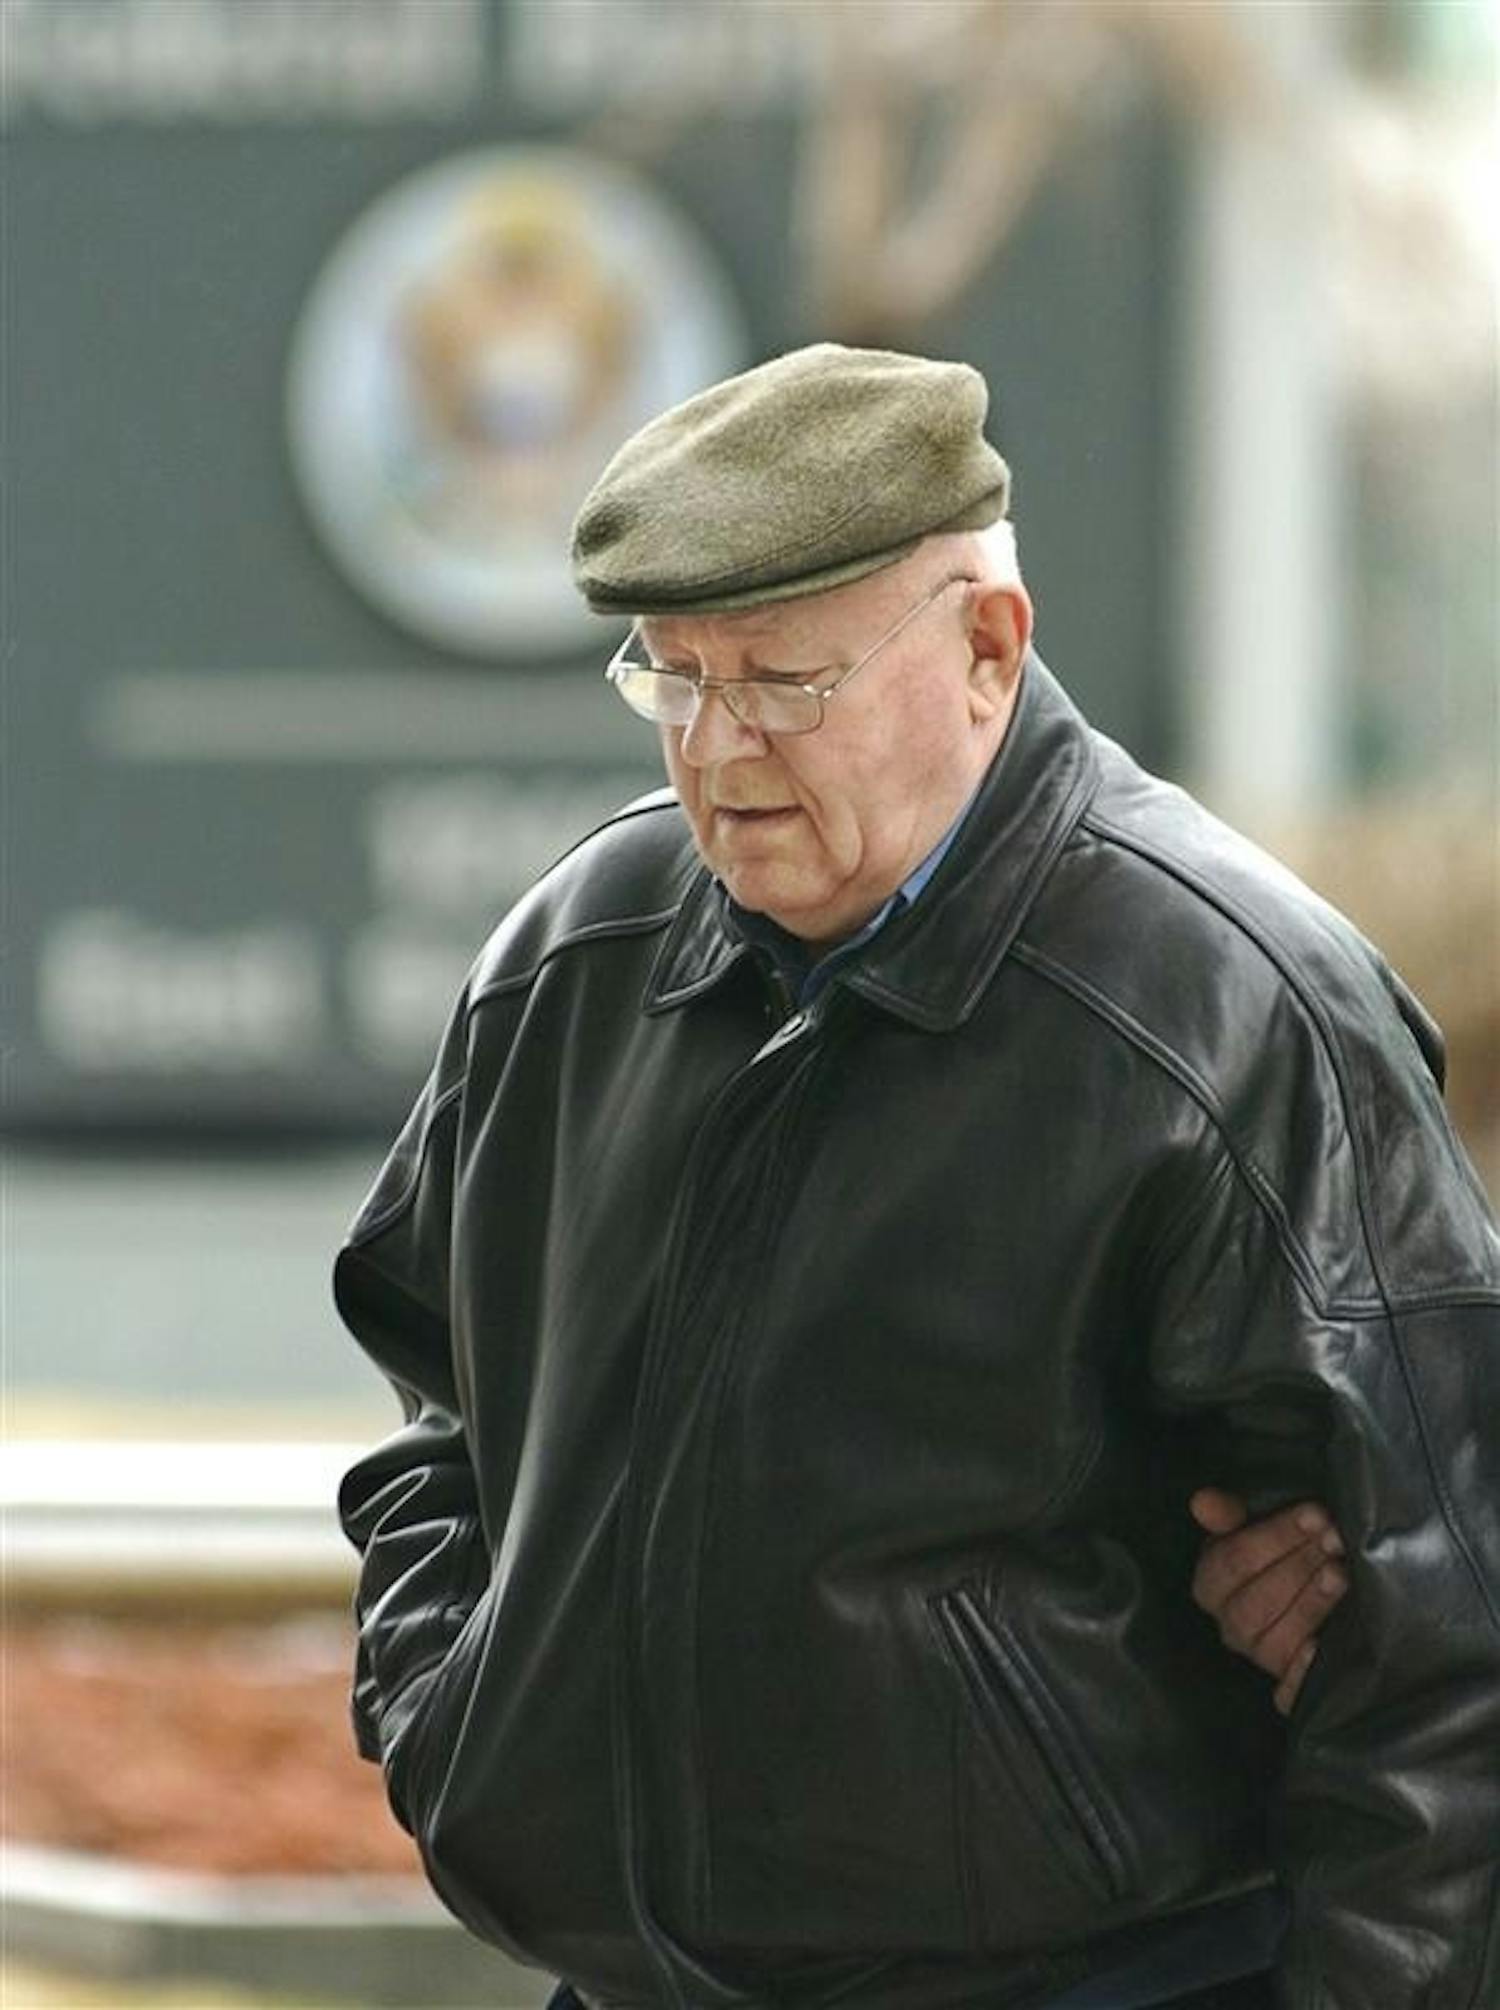 In this Feb. 28, 2005 file photo, John Demjanjuk arrives at the federal building in Cleveland for an immigration hearing. German prosecutors said Wednesday they have charged retired Ohio auto worker John Demjanjuk with more than 29,000 counts of accessory to murder for his time as a guard at the Nazis' Sobibor death camp, and will seek his extradition from the U.S.